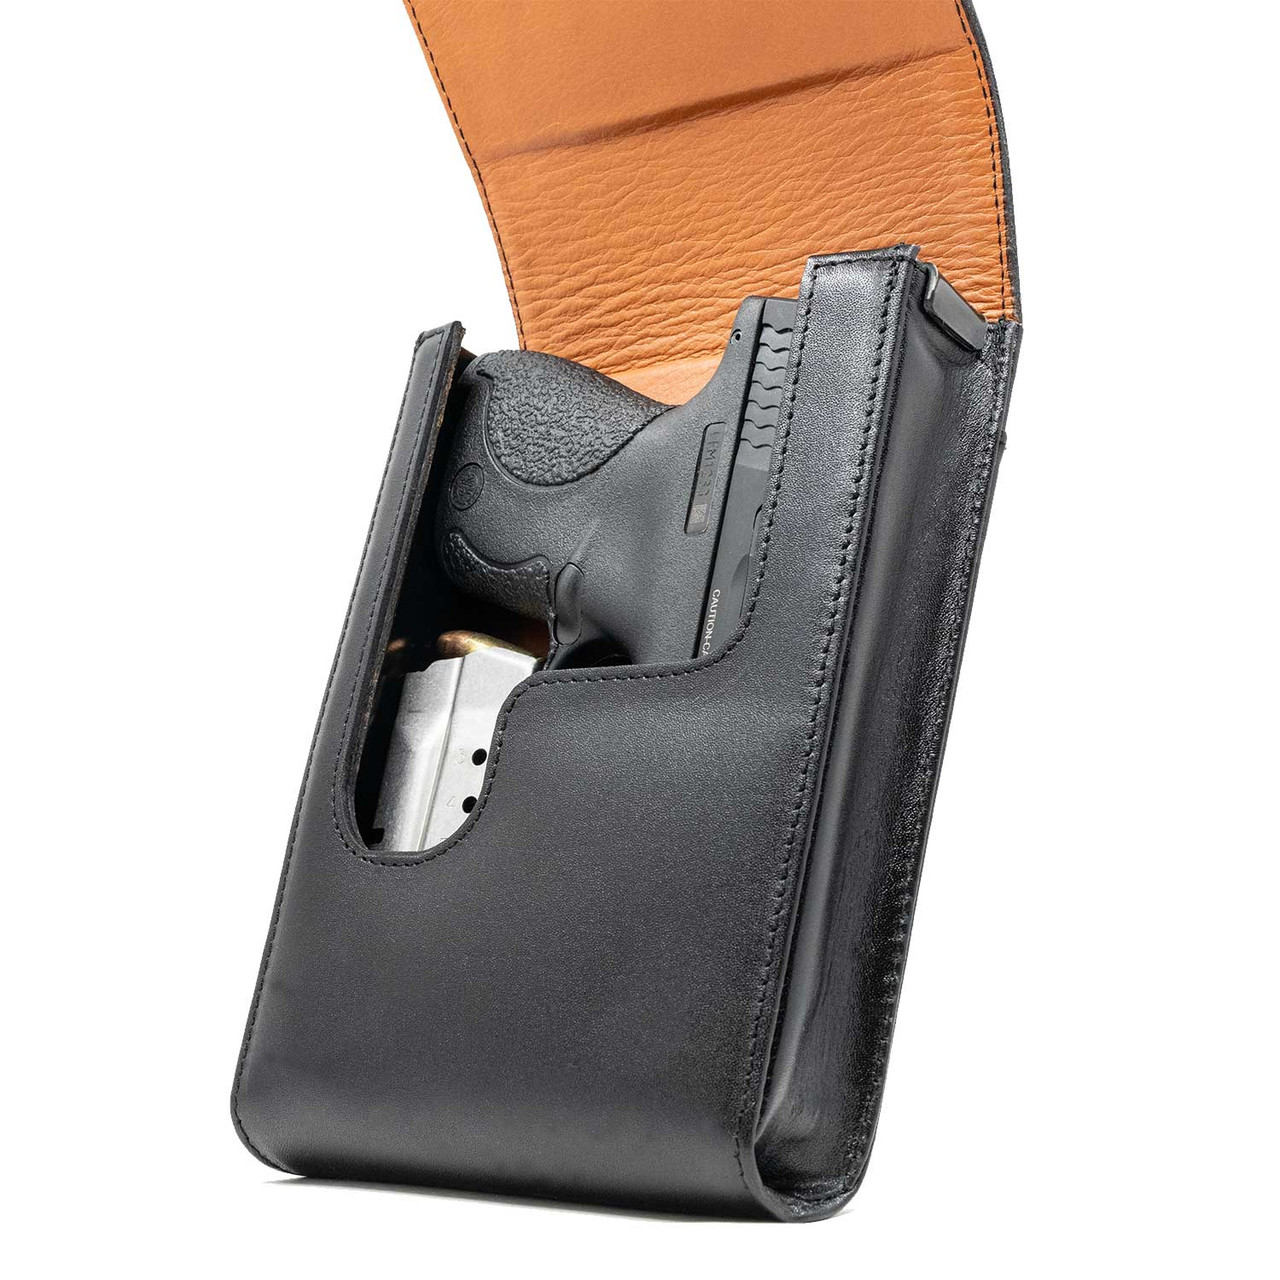 The Sphinx SDP SubCompact Xtra Mag Black Leather Holster